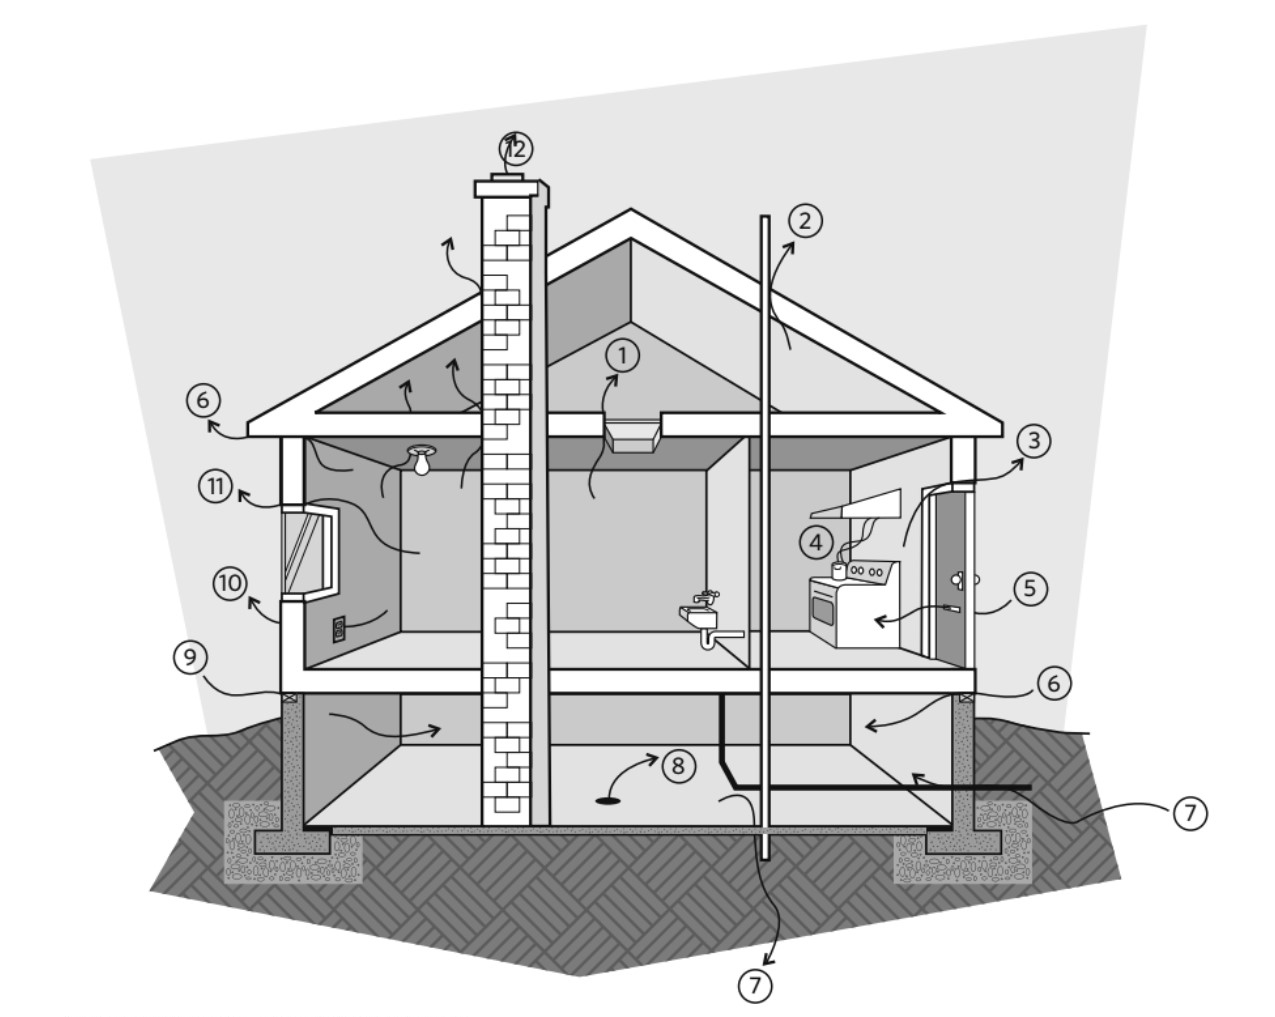 Home Air Flow Locations. Find a long description directly below this image